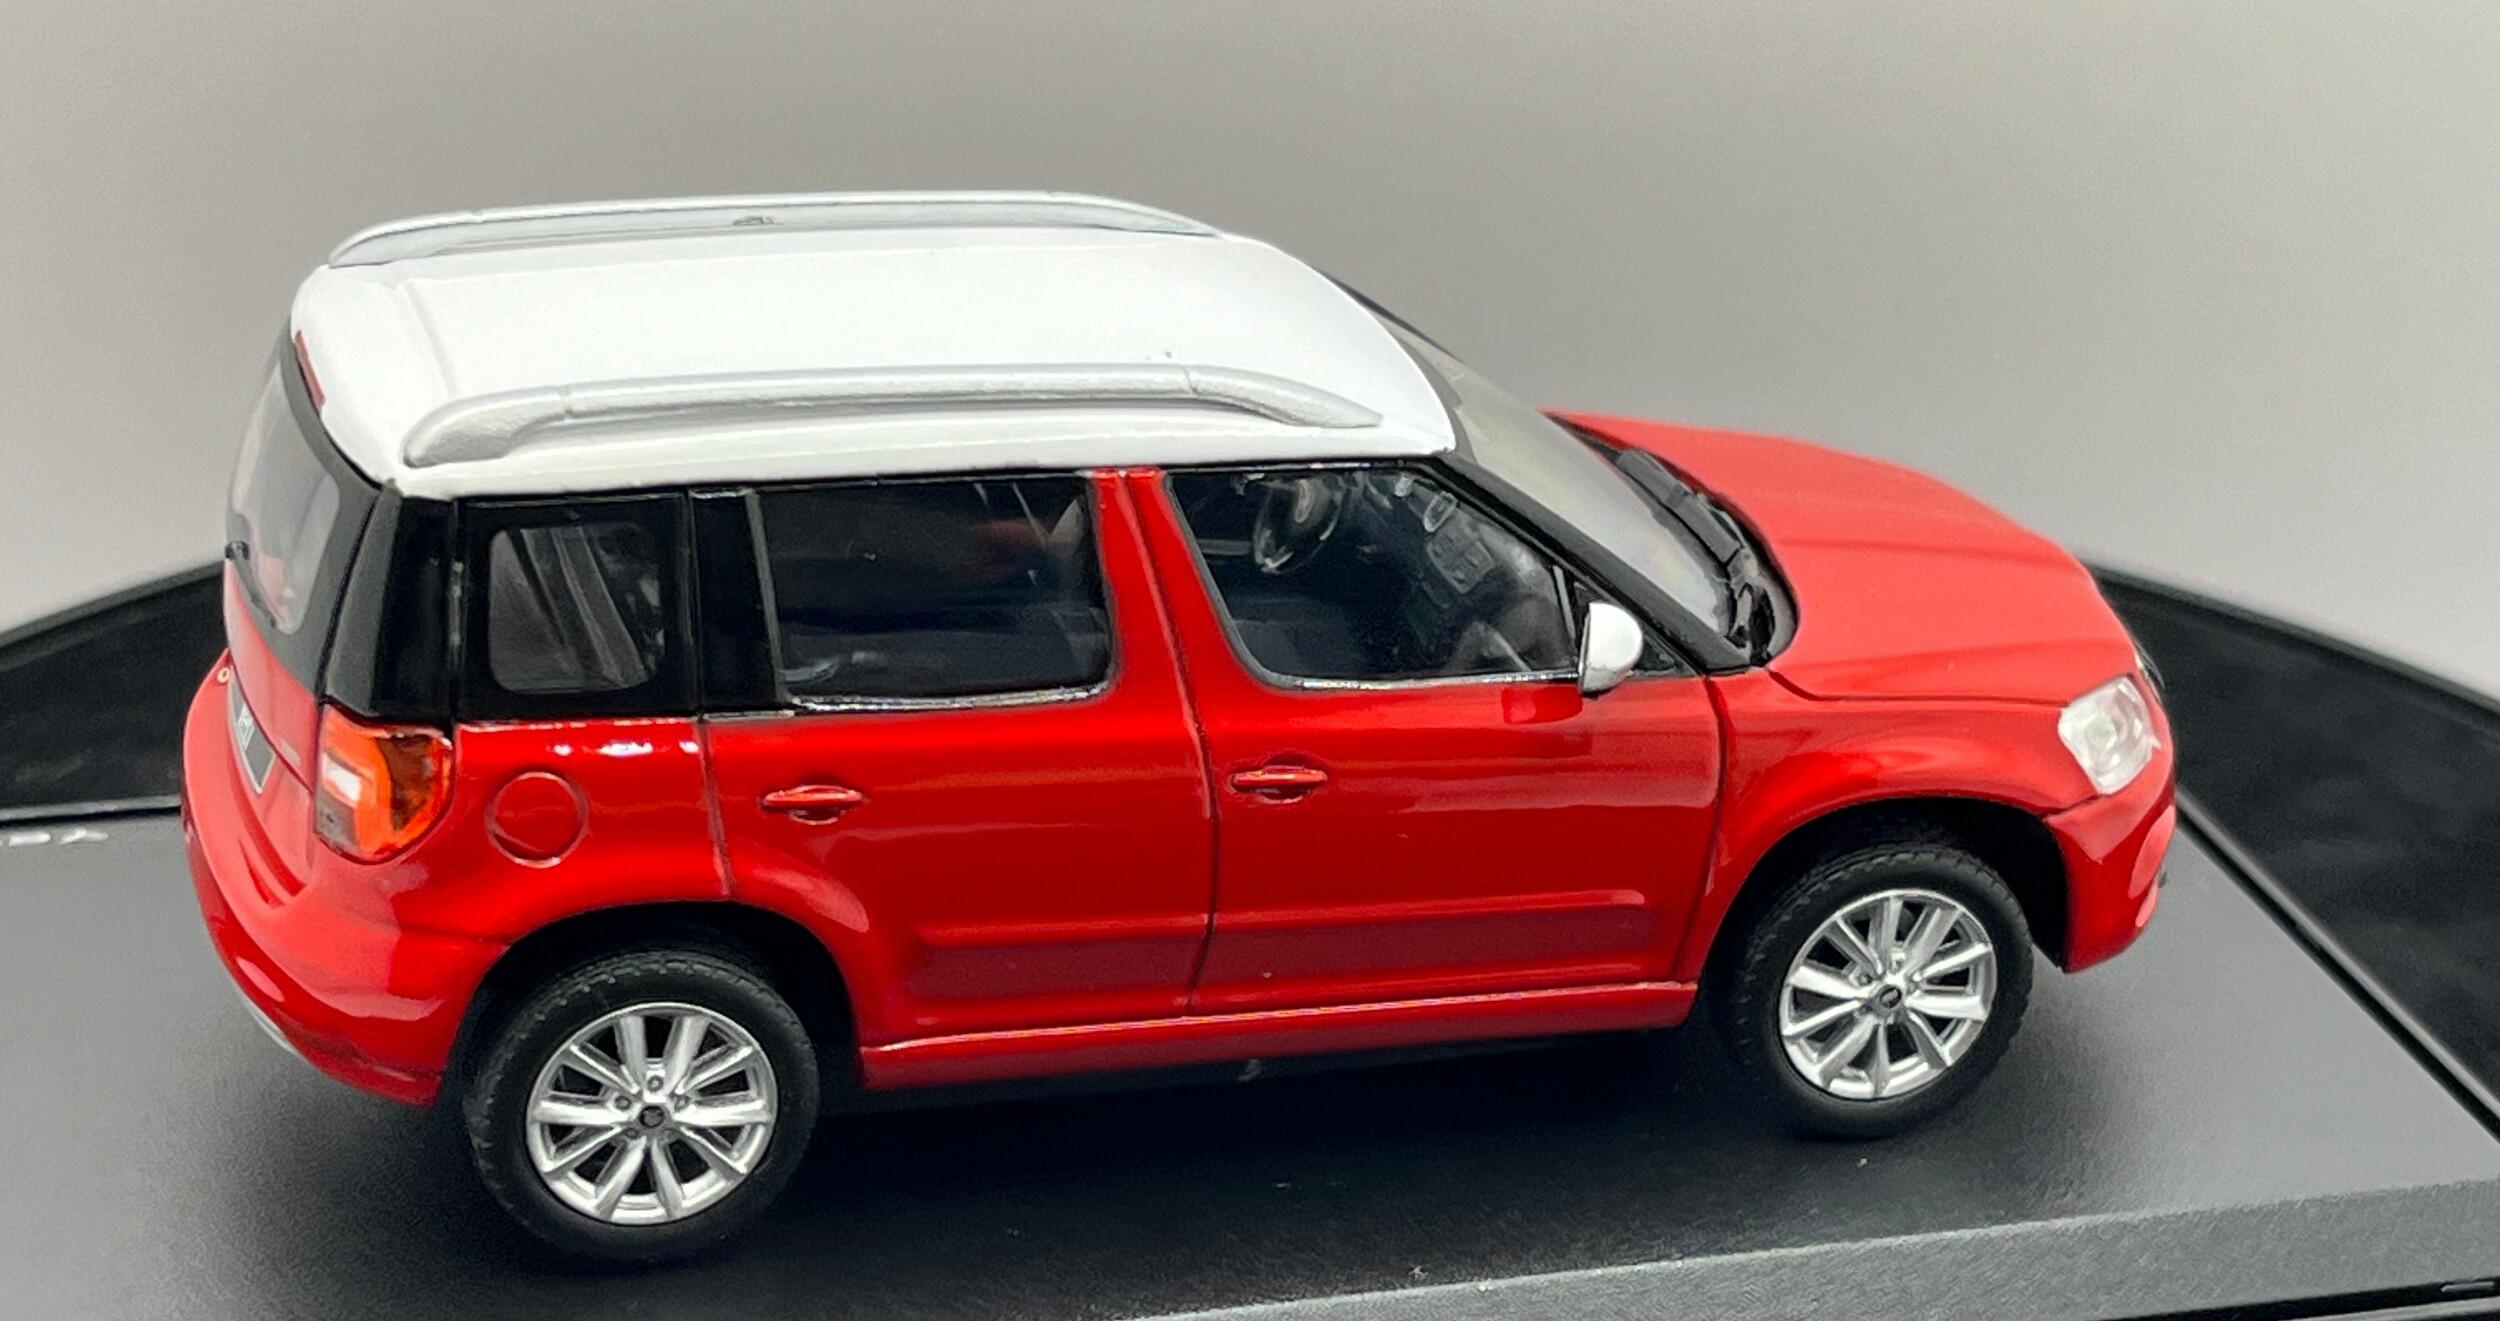 An excellent reproduction of the Skoda Yeti FL from 2013 with detail throughout, all authentically recreated.  The Yeti FL model is presented on a removable plinth with a removable hard plastic cover